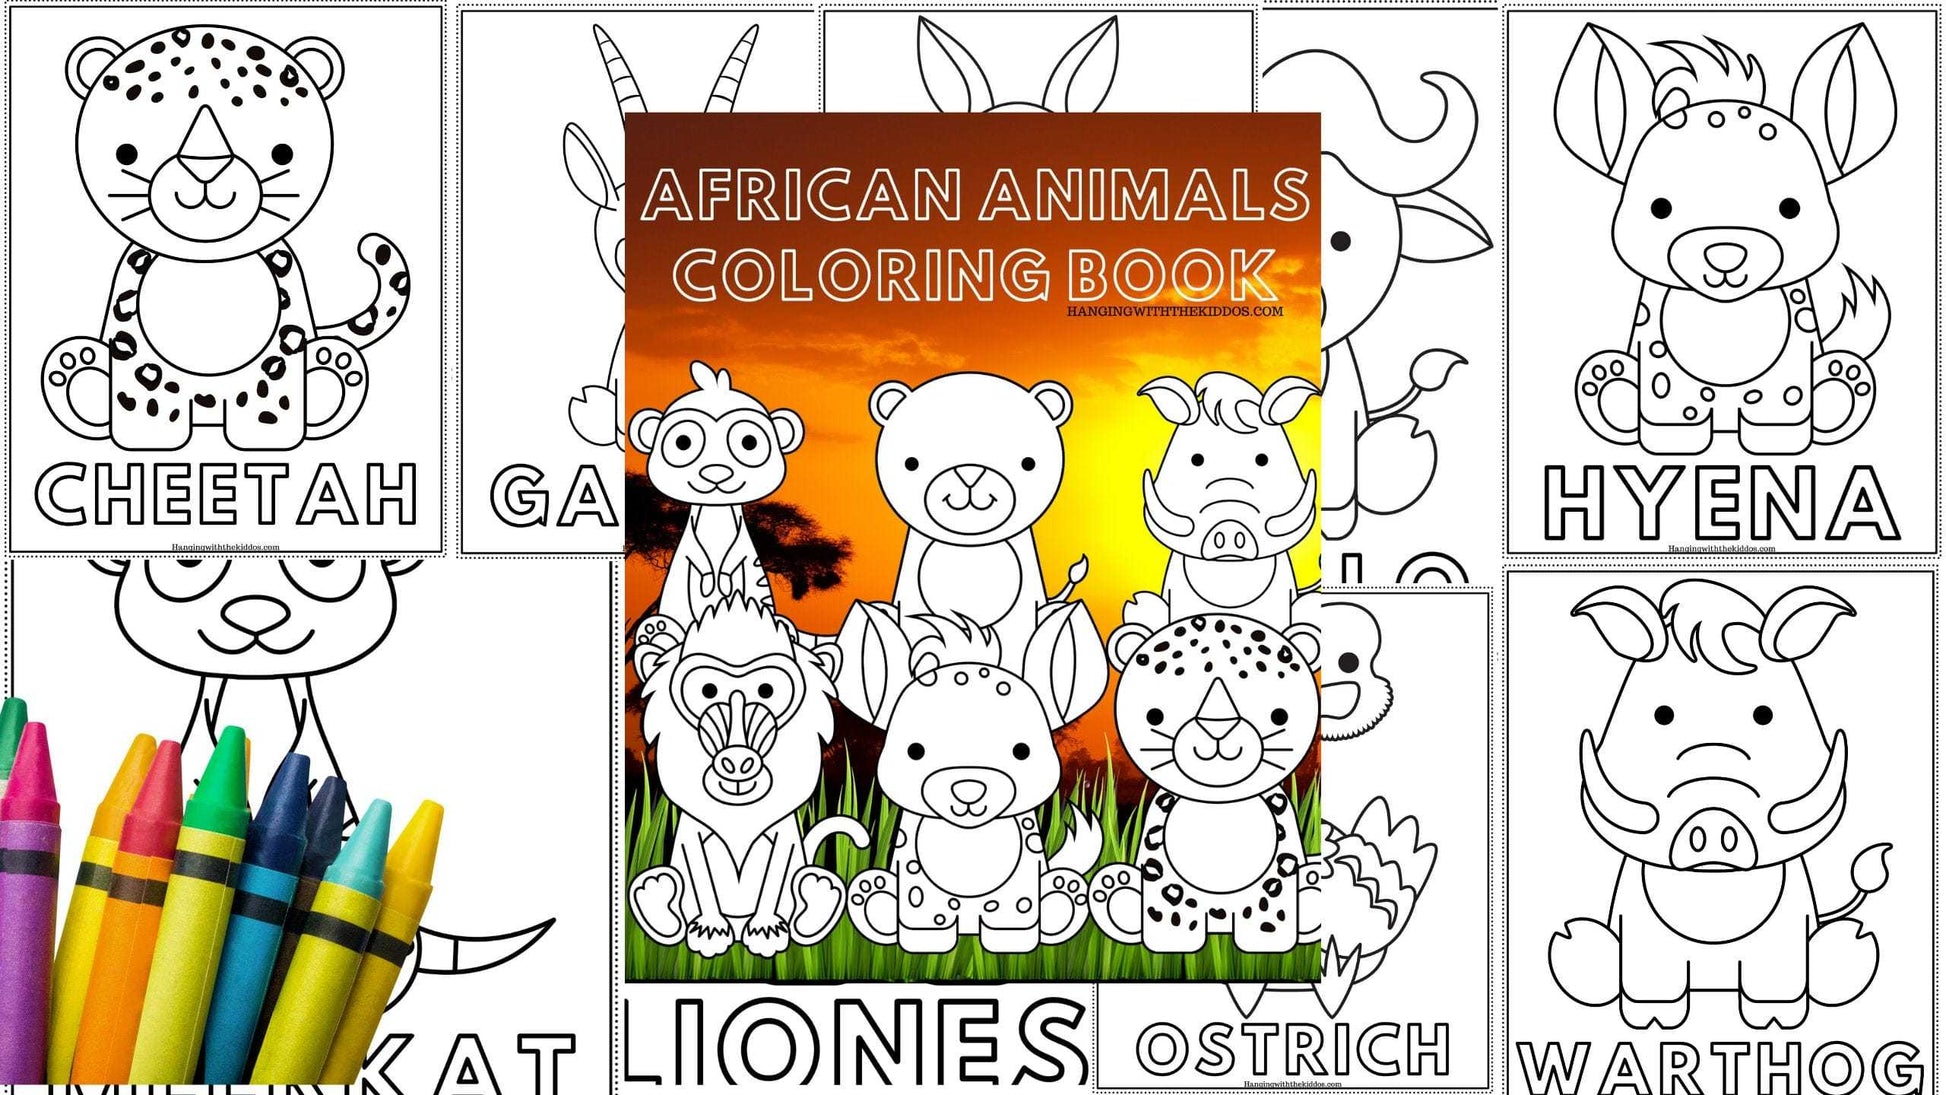 African animals coloring book printable colouring book for kids and adults zoo animal â hanging with the kiddos